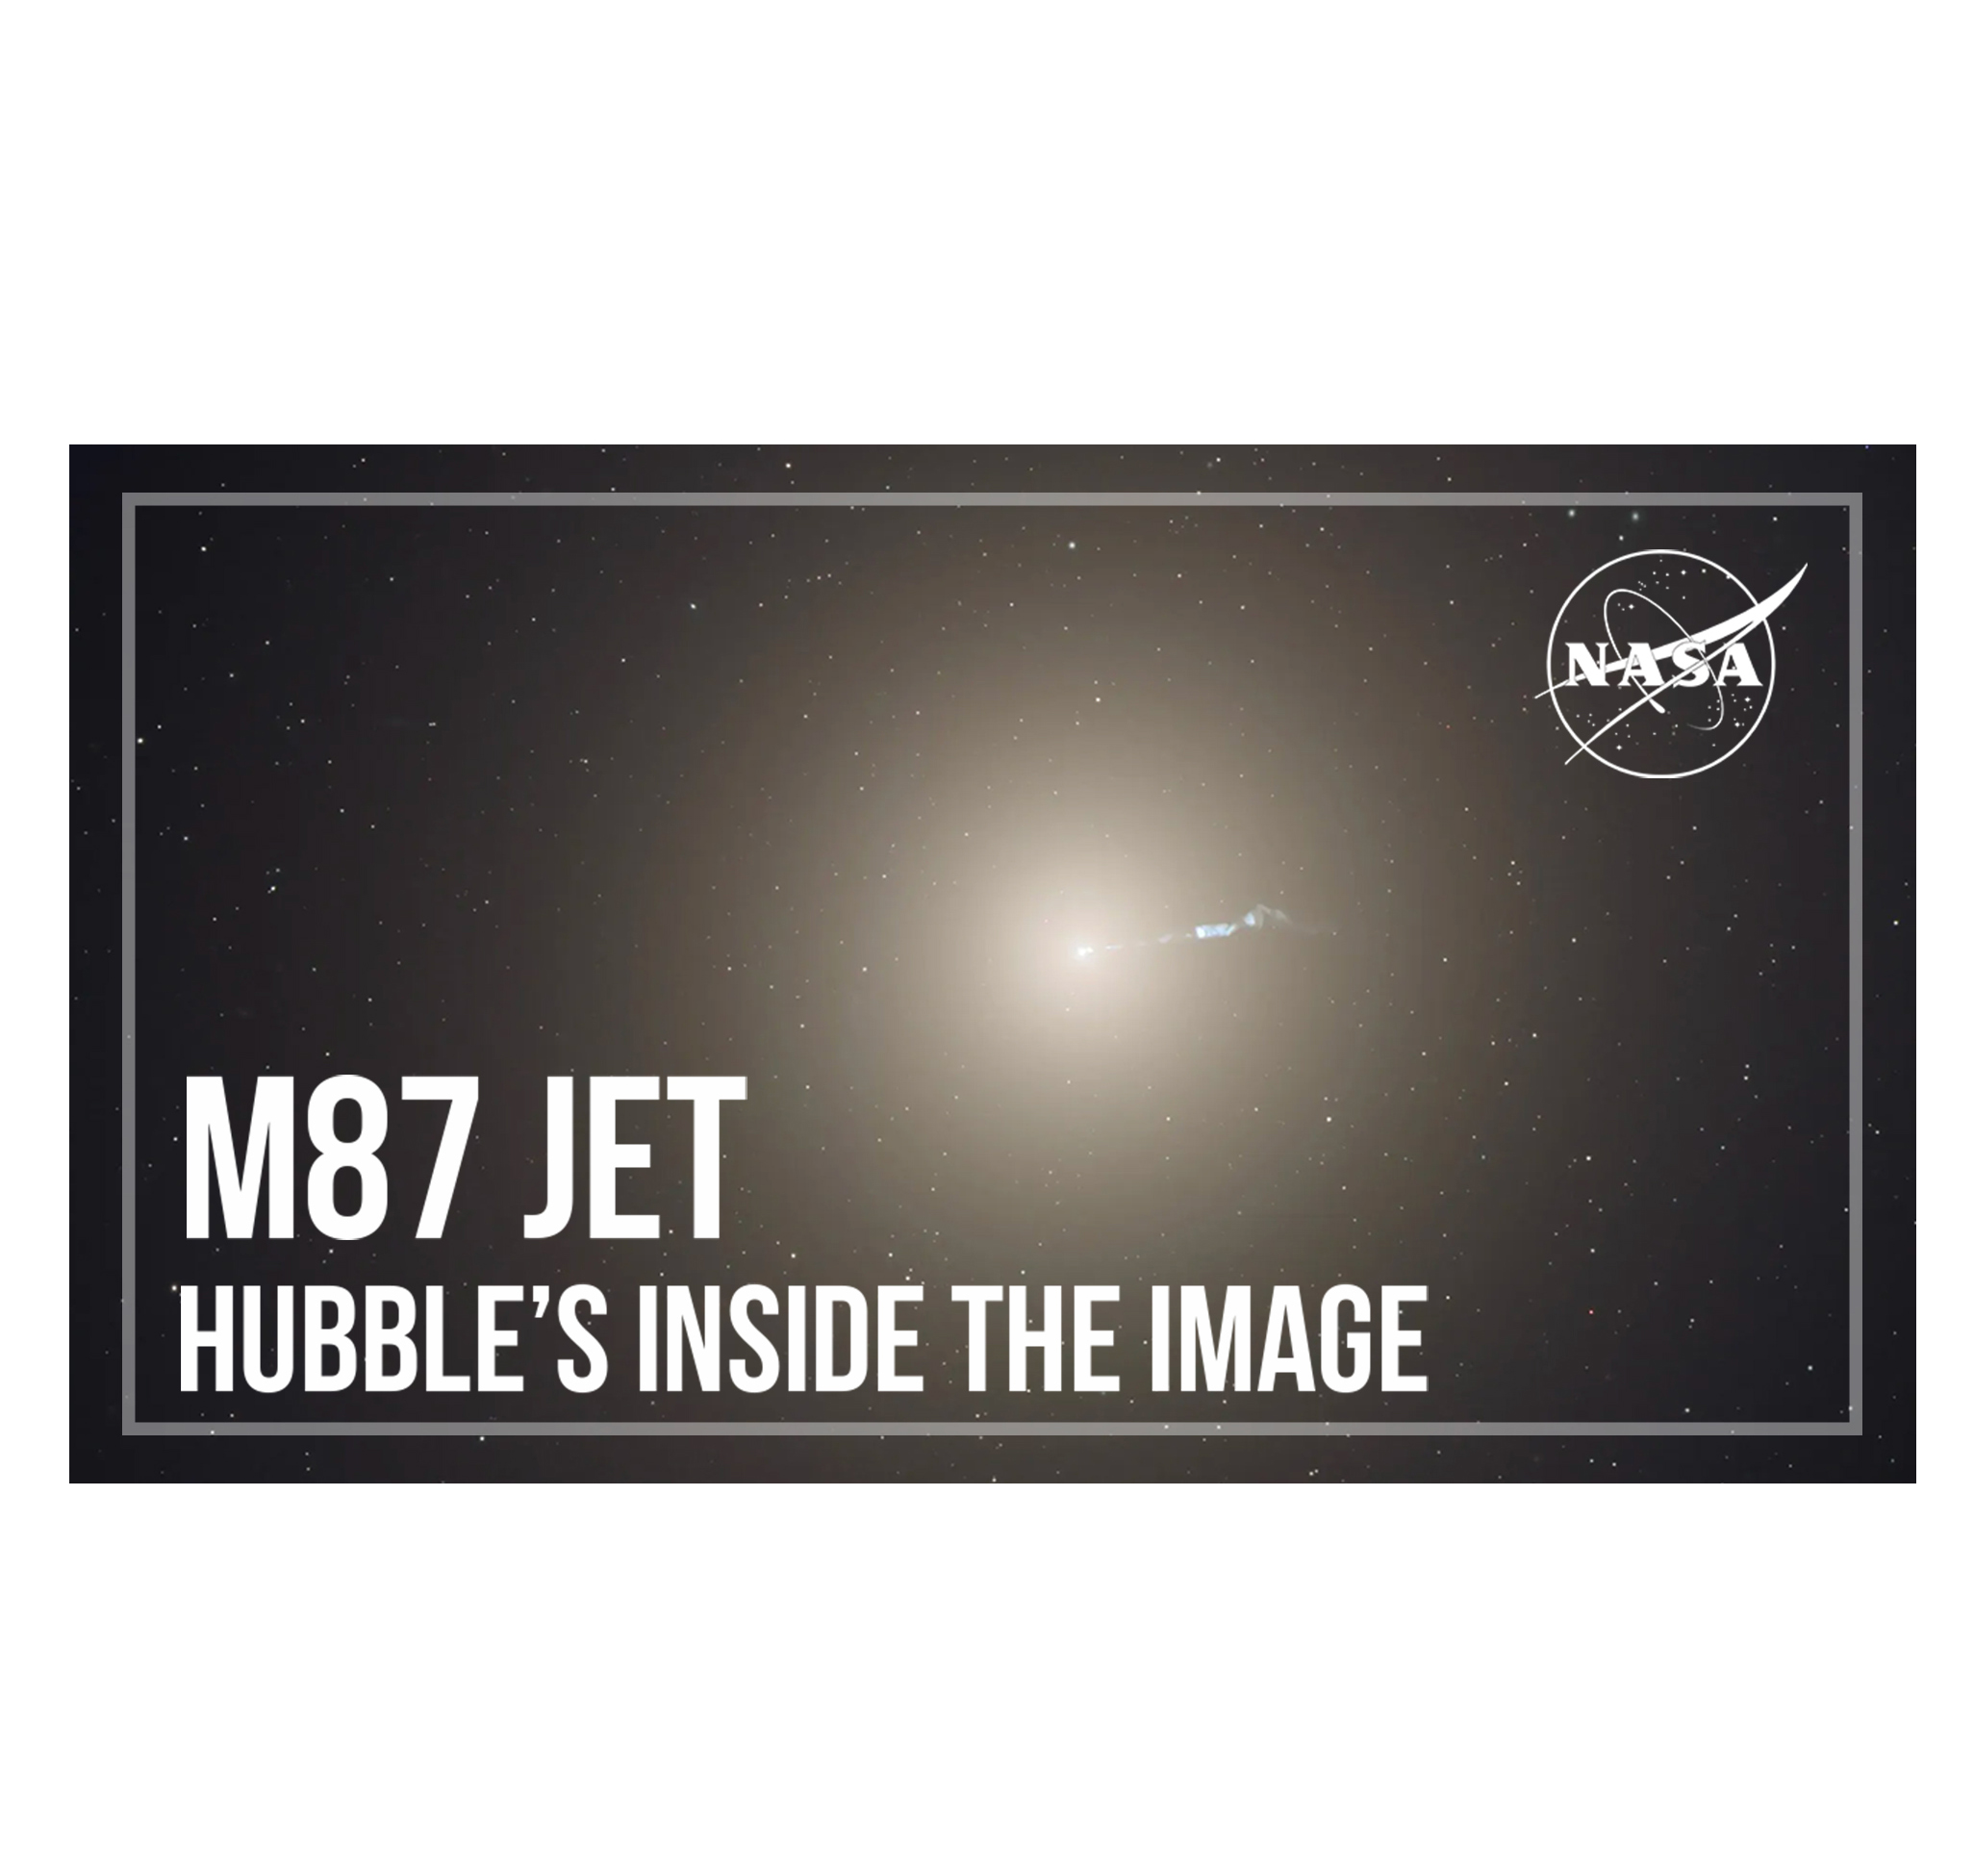 A bright ball of stars, gas, and dust is the elliptical galaxy M87. Its core is brighter and fades with distance. A bright jet of material extends from the core. Title text: Hubble's Inside the Image: M87 Jet